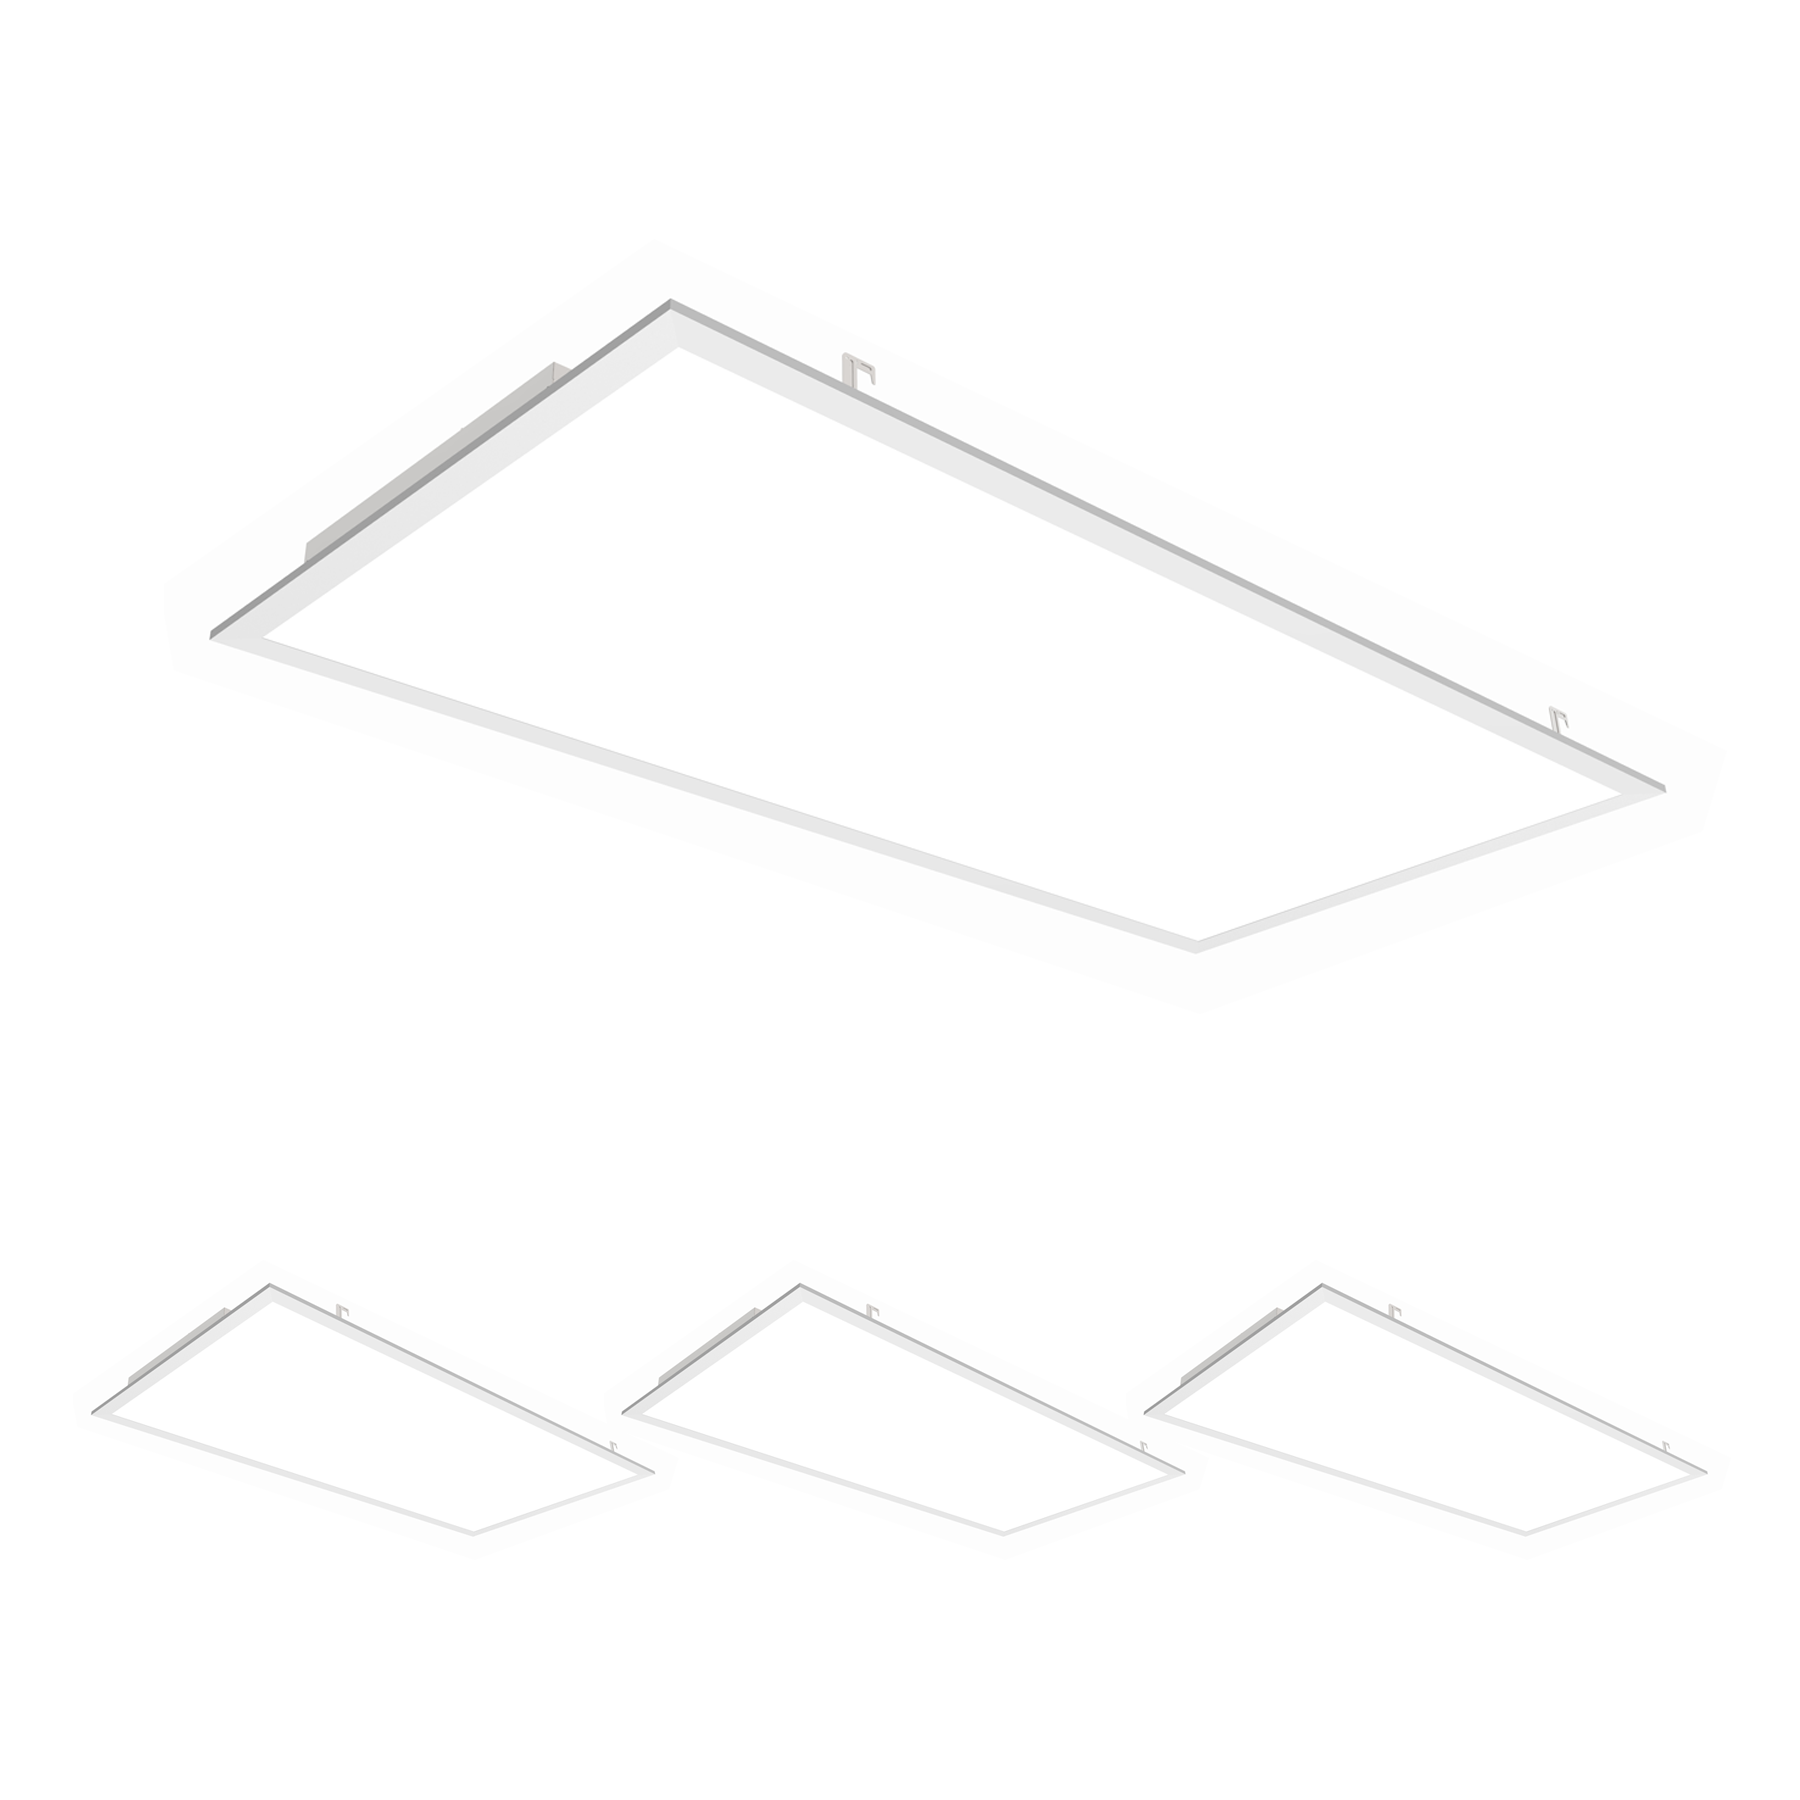 2 ft. X 4 ft. LED Panel Light 4000K Neutral White 72W 9000LM Dimmable, AC120V-277V, UL, DLC Listed, Damp Location, Flat Backlit Fixture, Recessed/Drop Ceiling Install